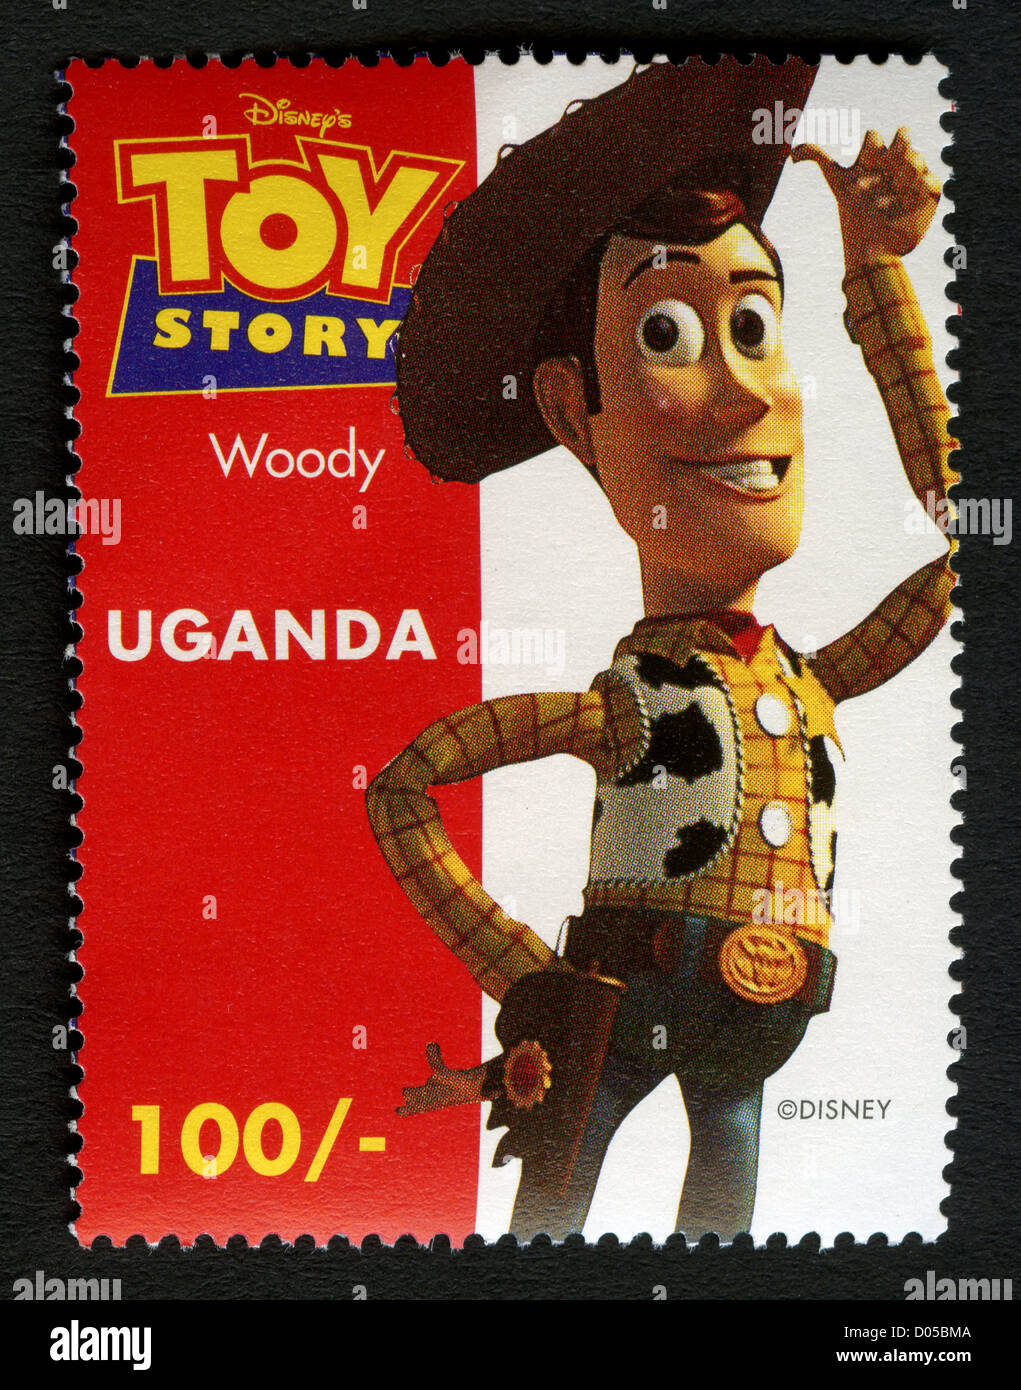 Uganda postage stamp depicting Disney cartoon character - Woody from Toy Story Stock Photo